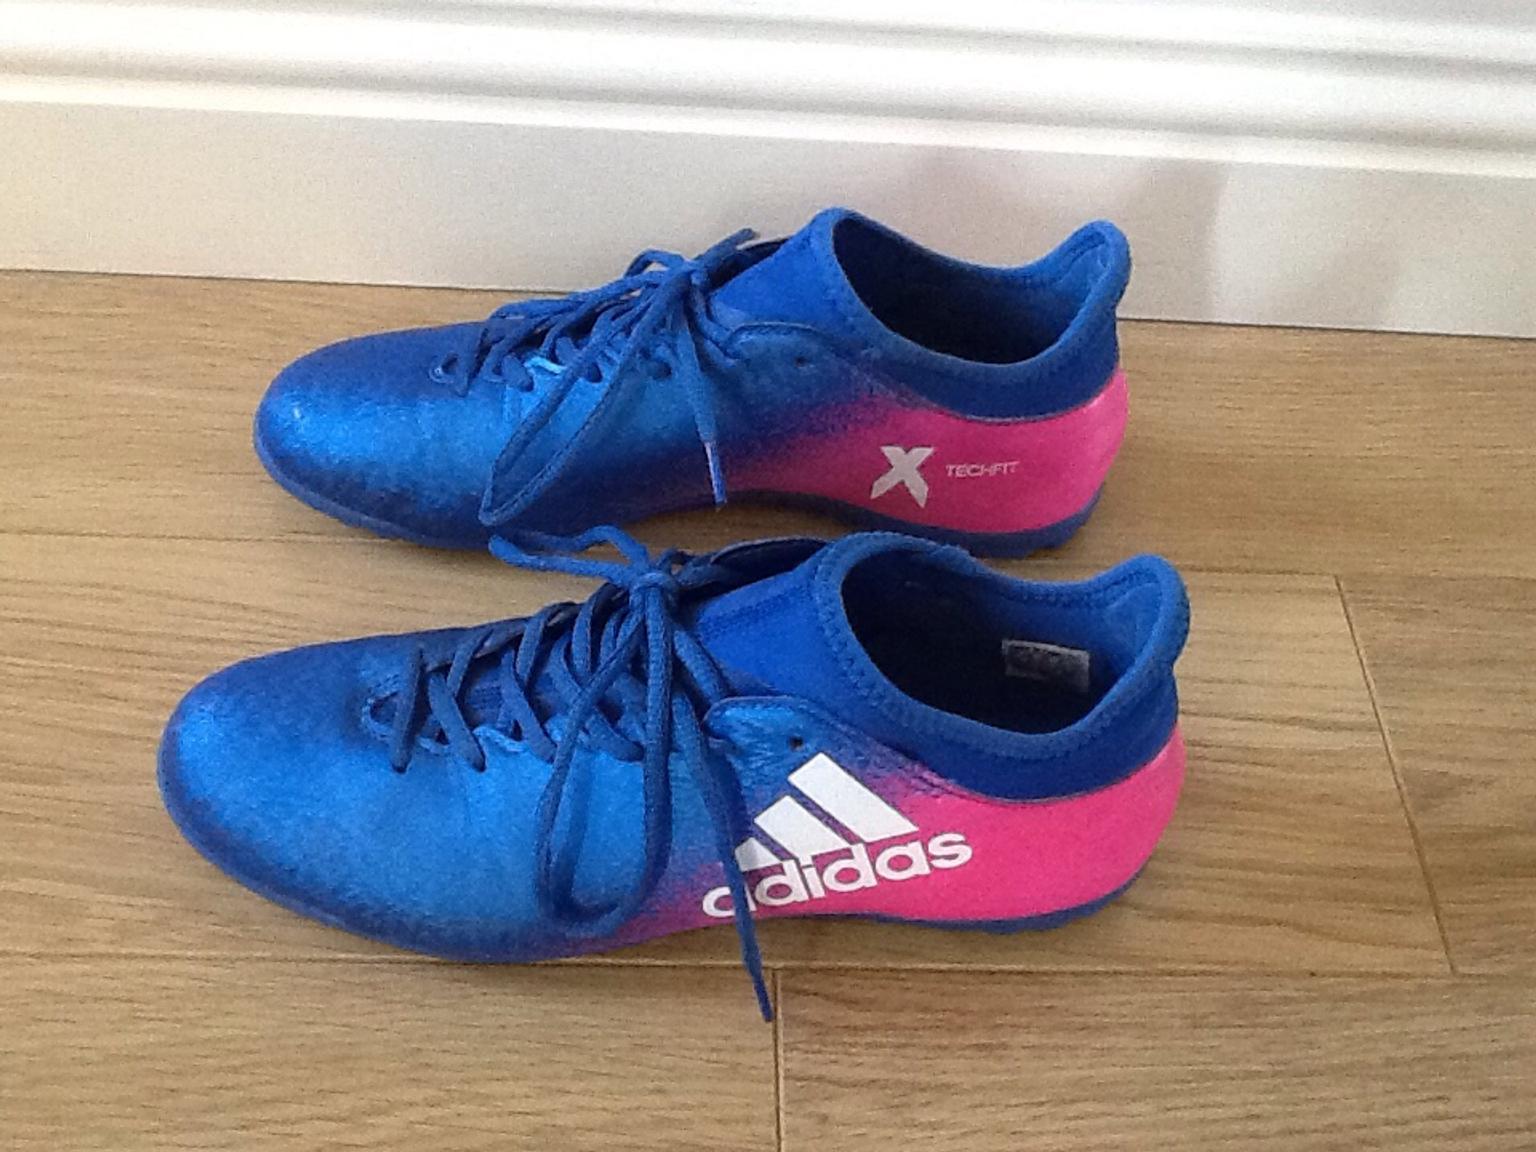 Adidas X 16.3 astro boots size 9 in South Kesteven for £18.00 for sale |  Shpock